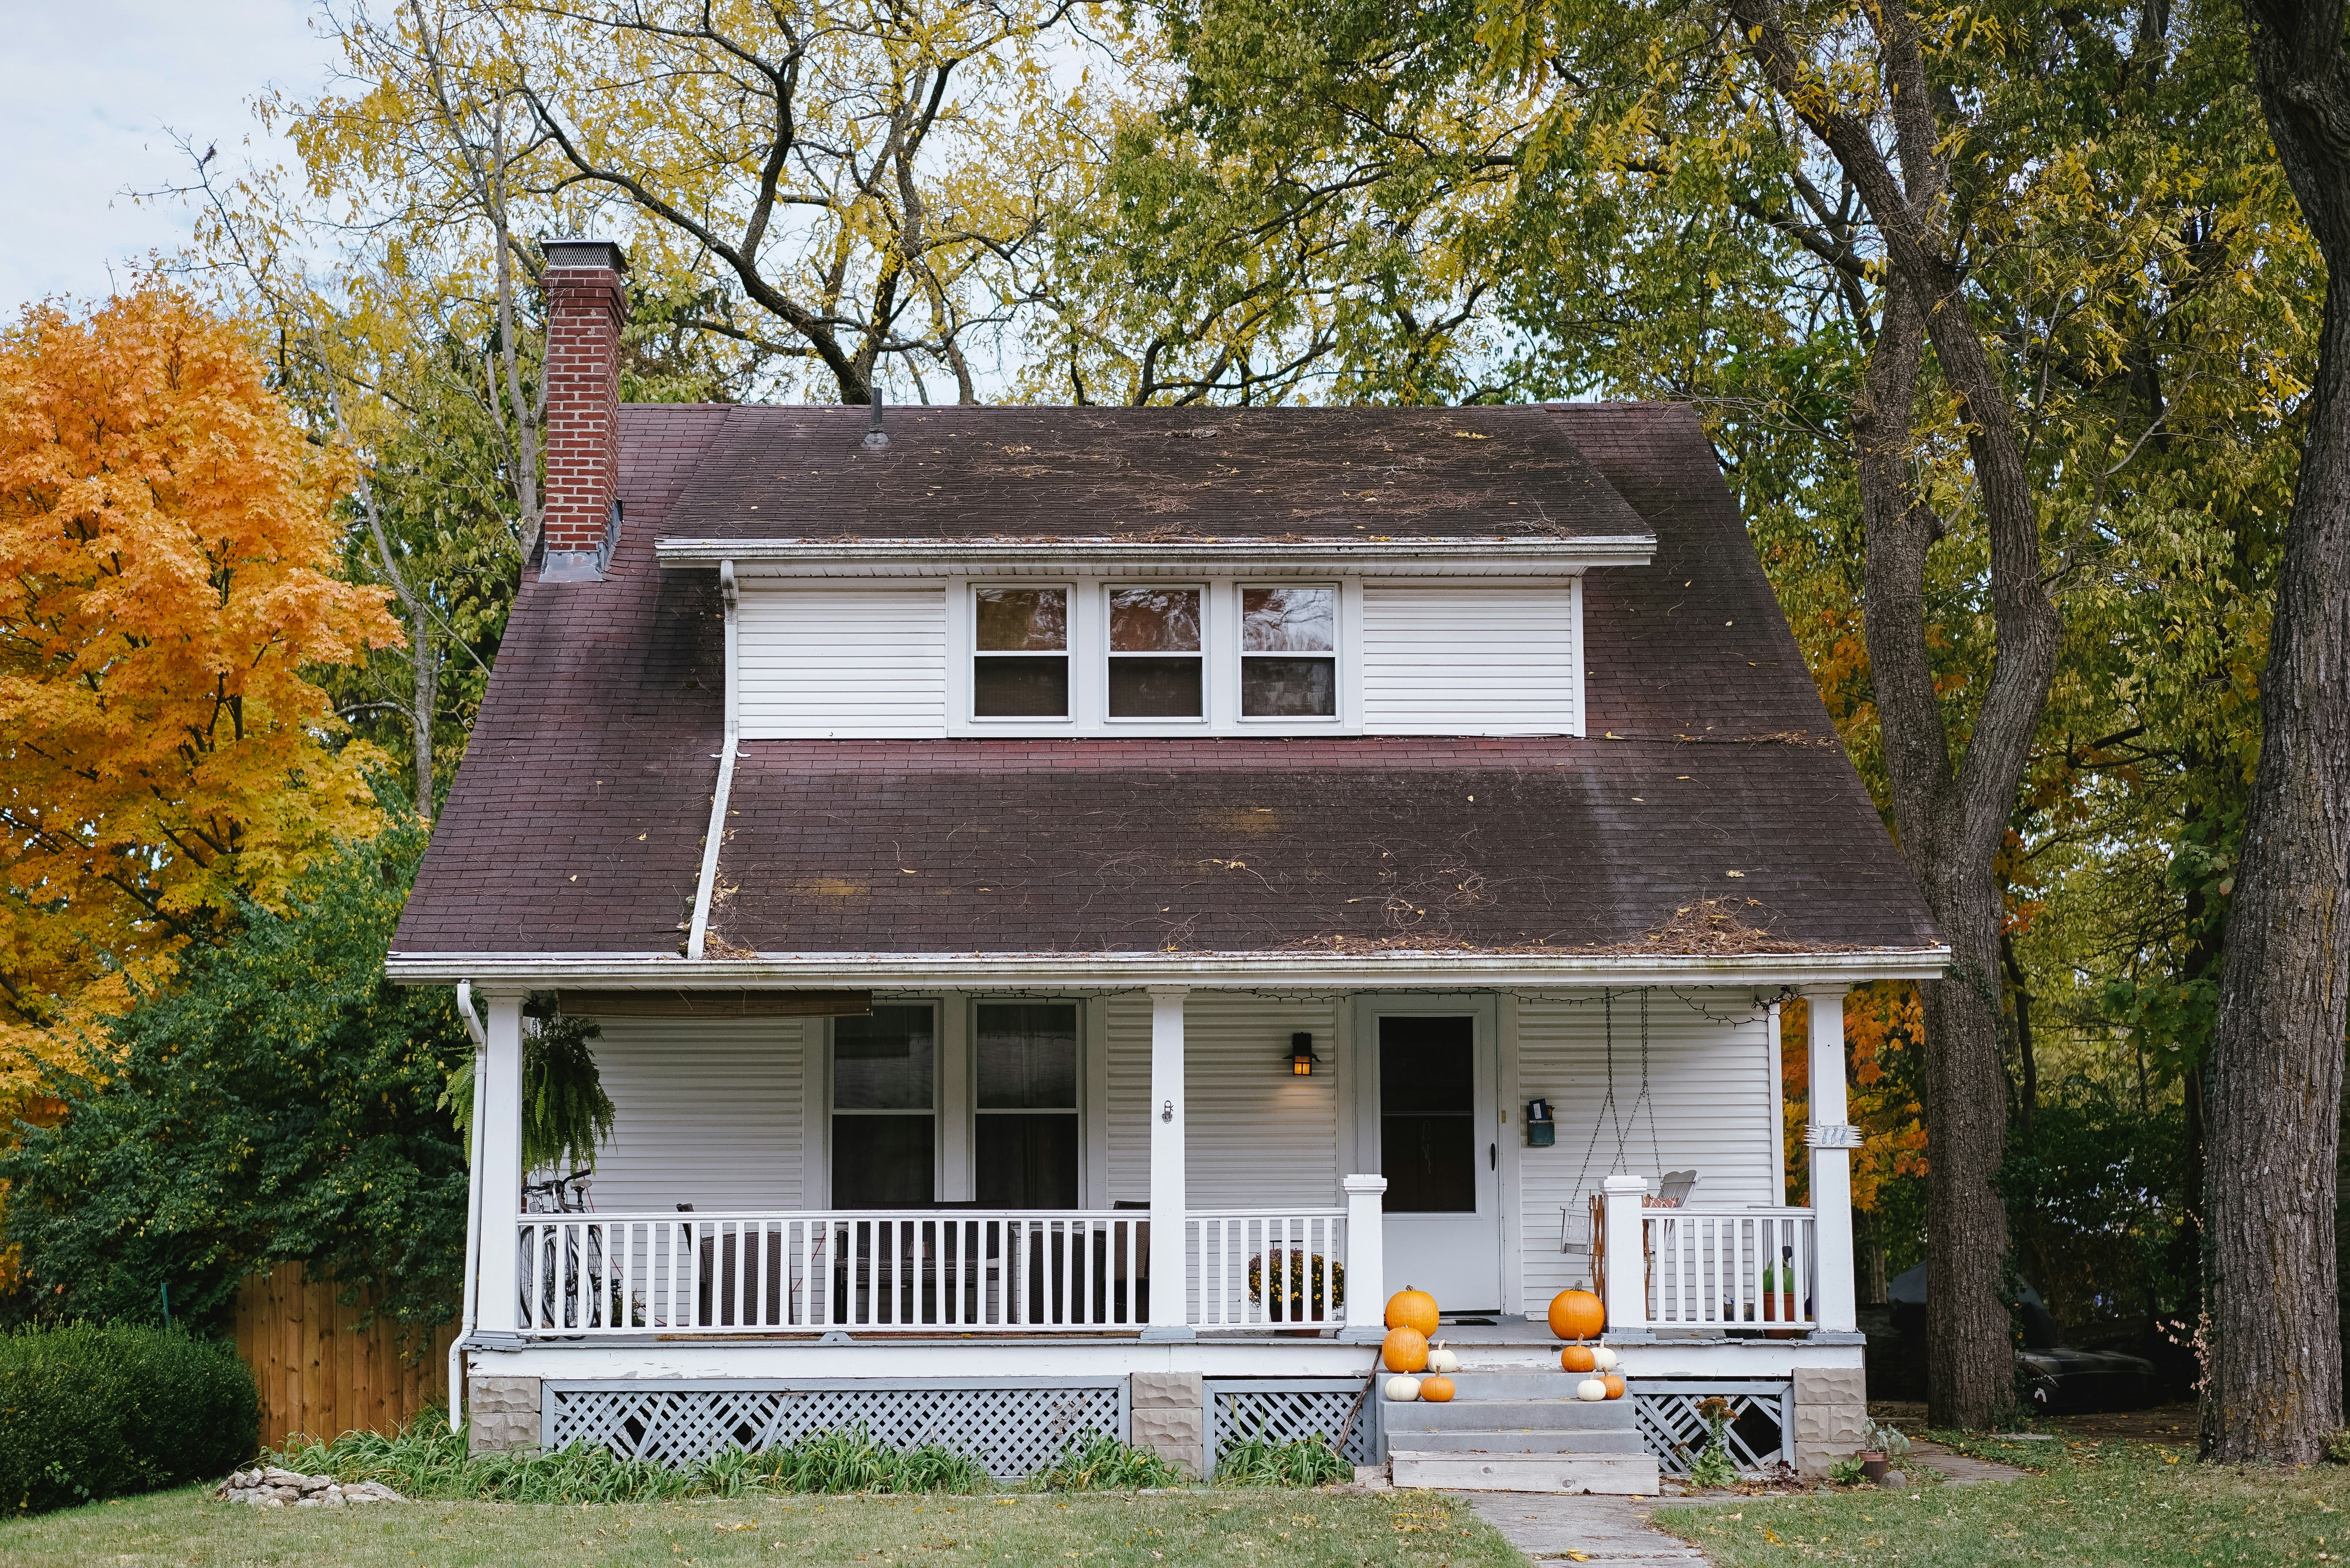 A small house in yellow springs USA 